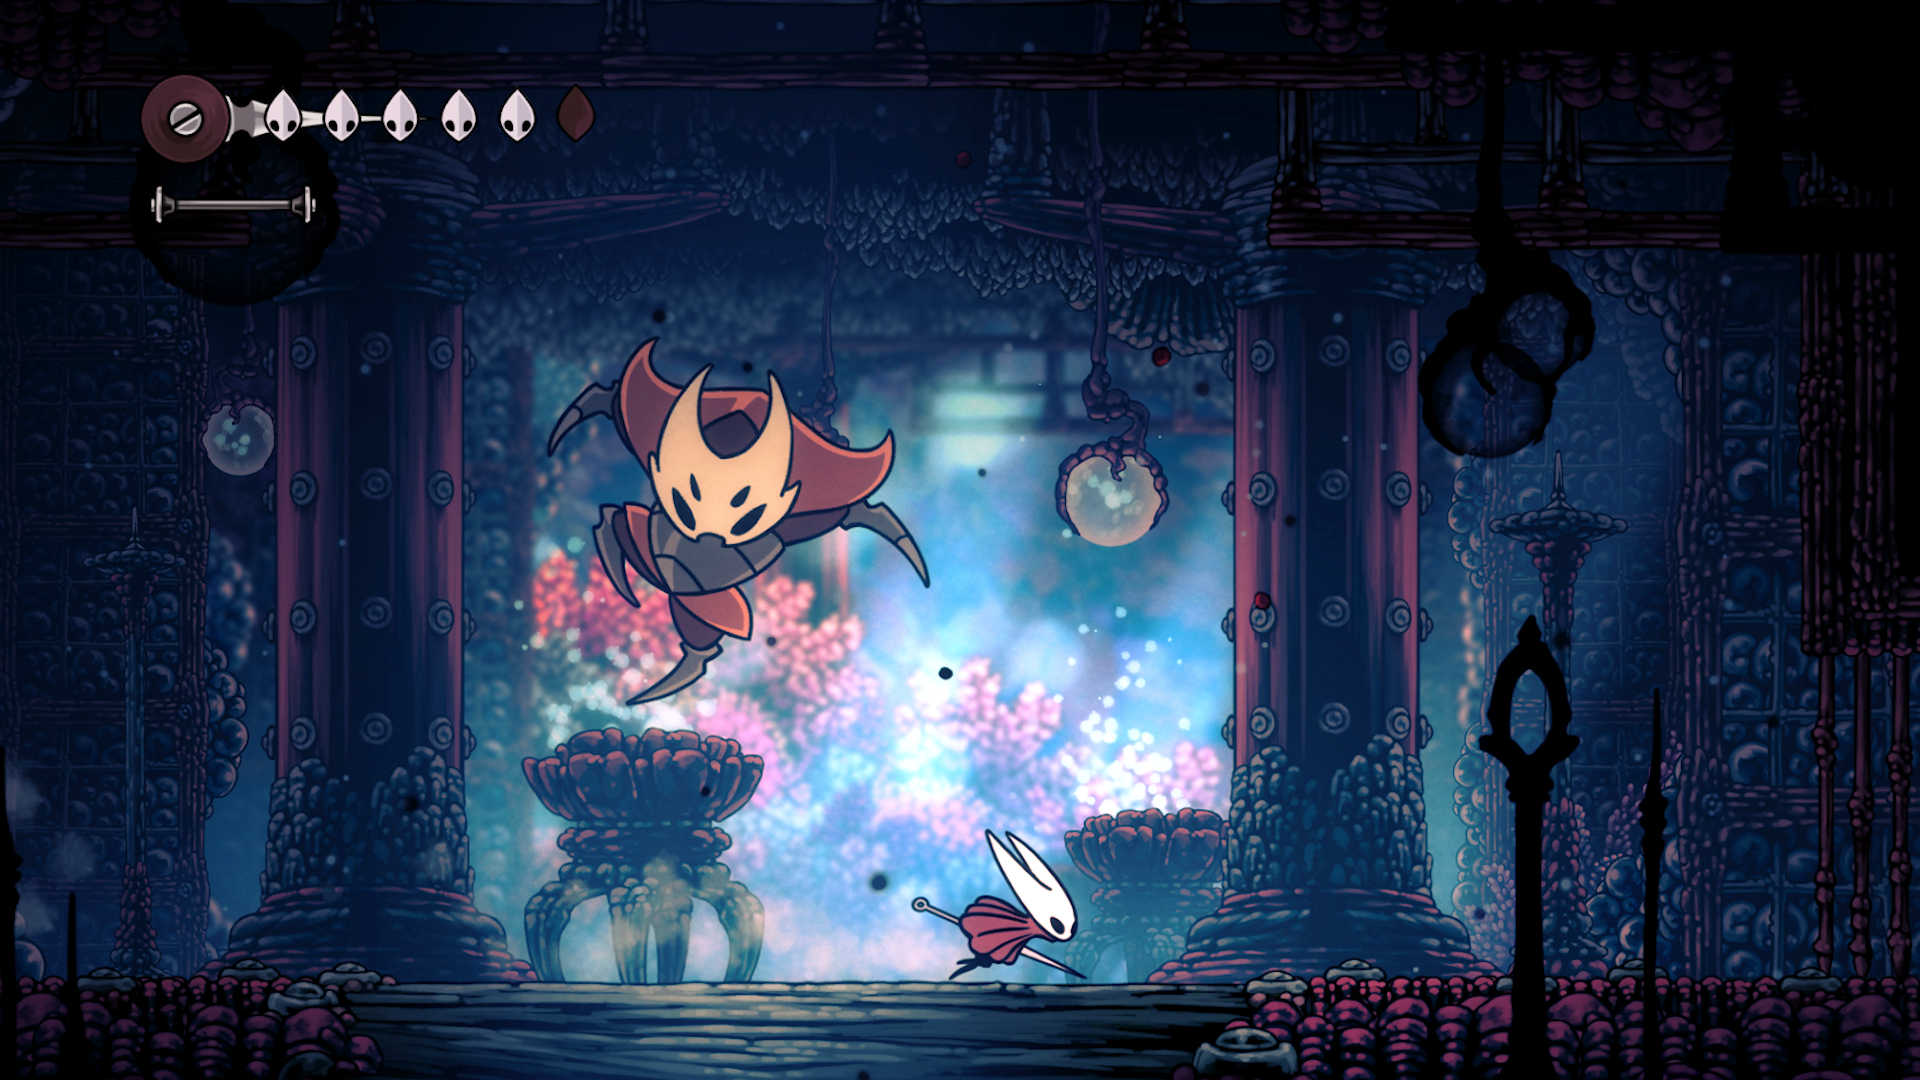 Hollow Knight: Silksong releases 'When it matches the quality